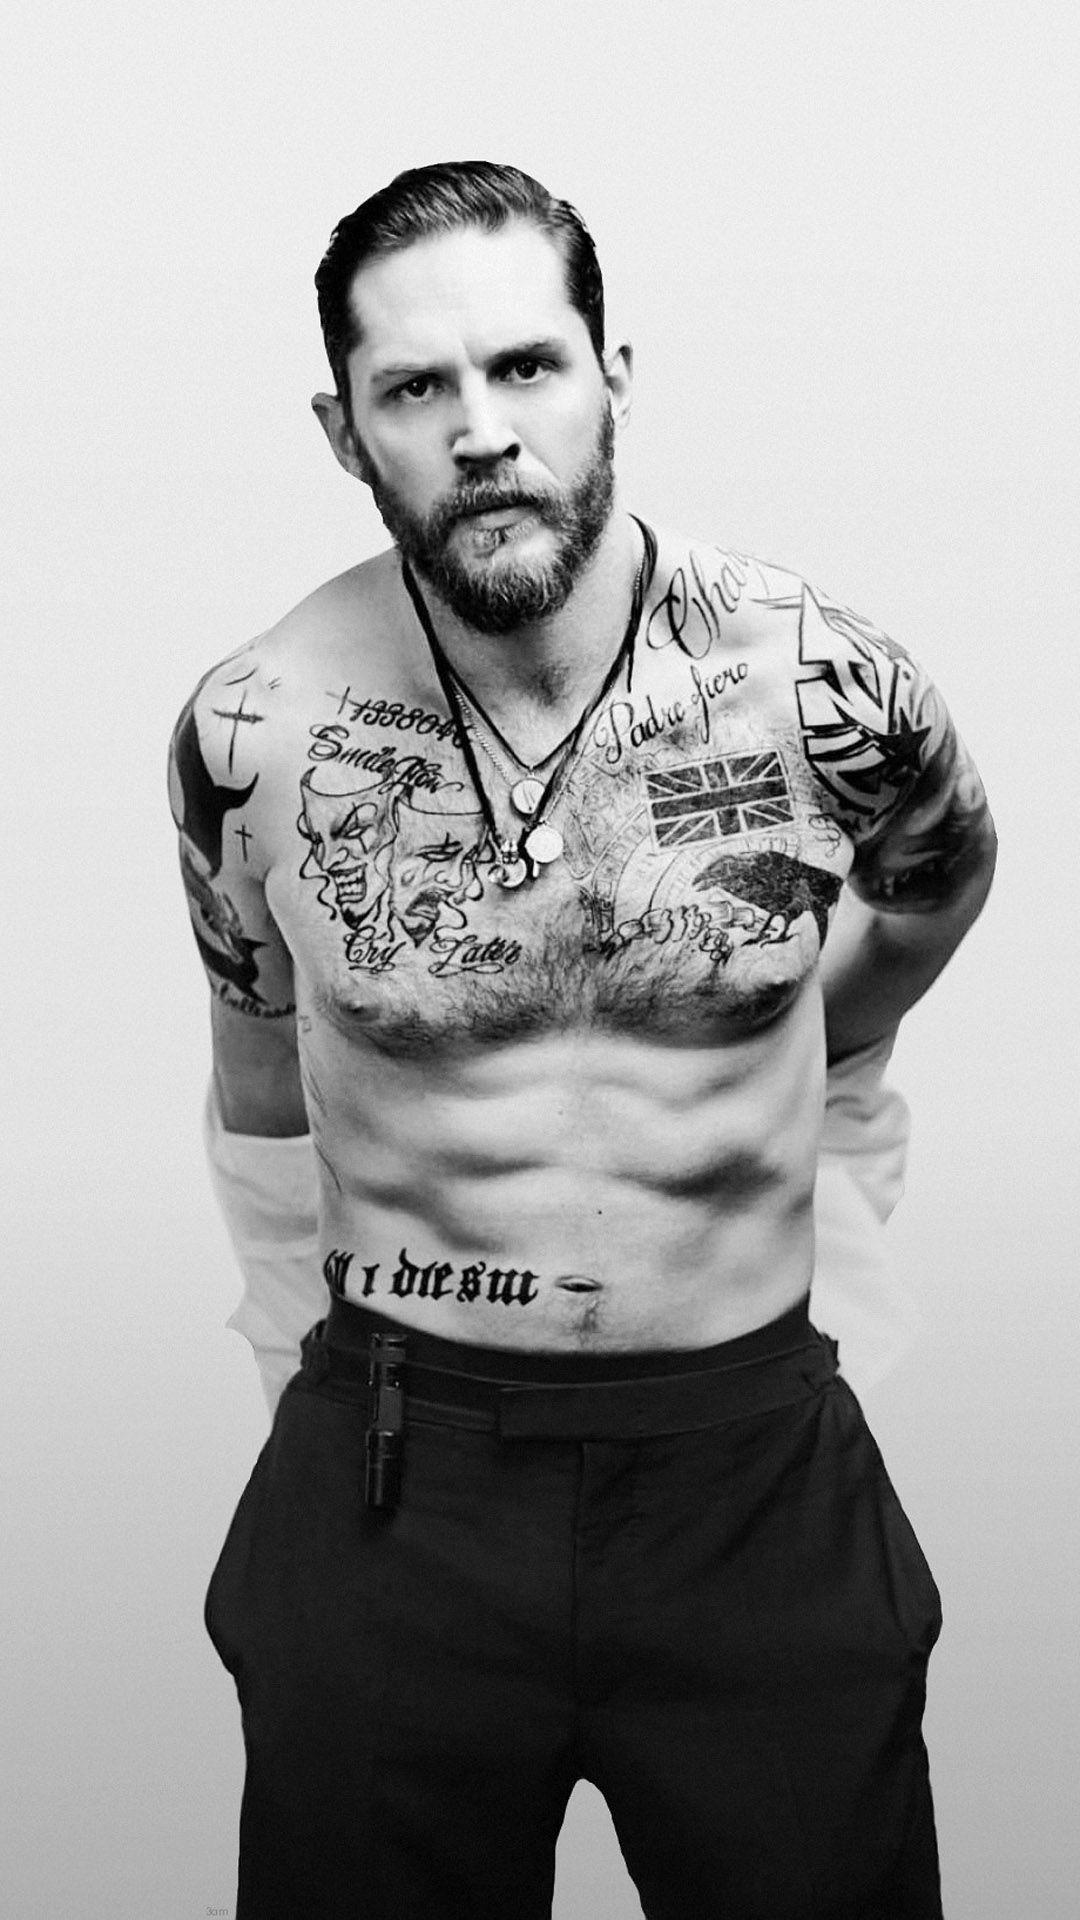 Tom Hardy Wallpaper for iPhone iPhone 7 plus, iPhone 6 plus